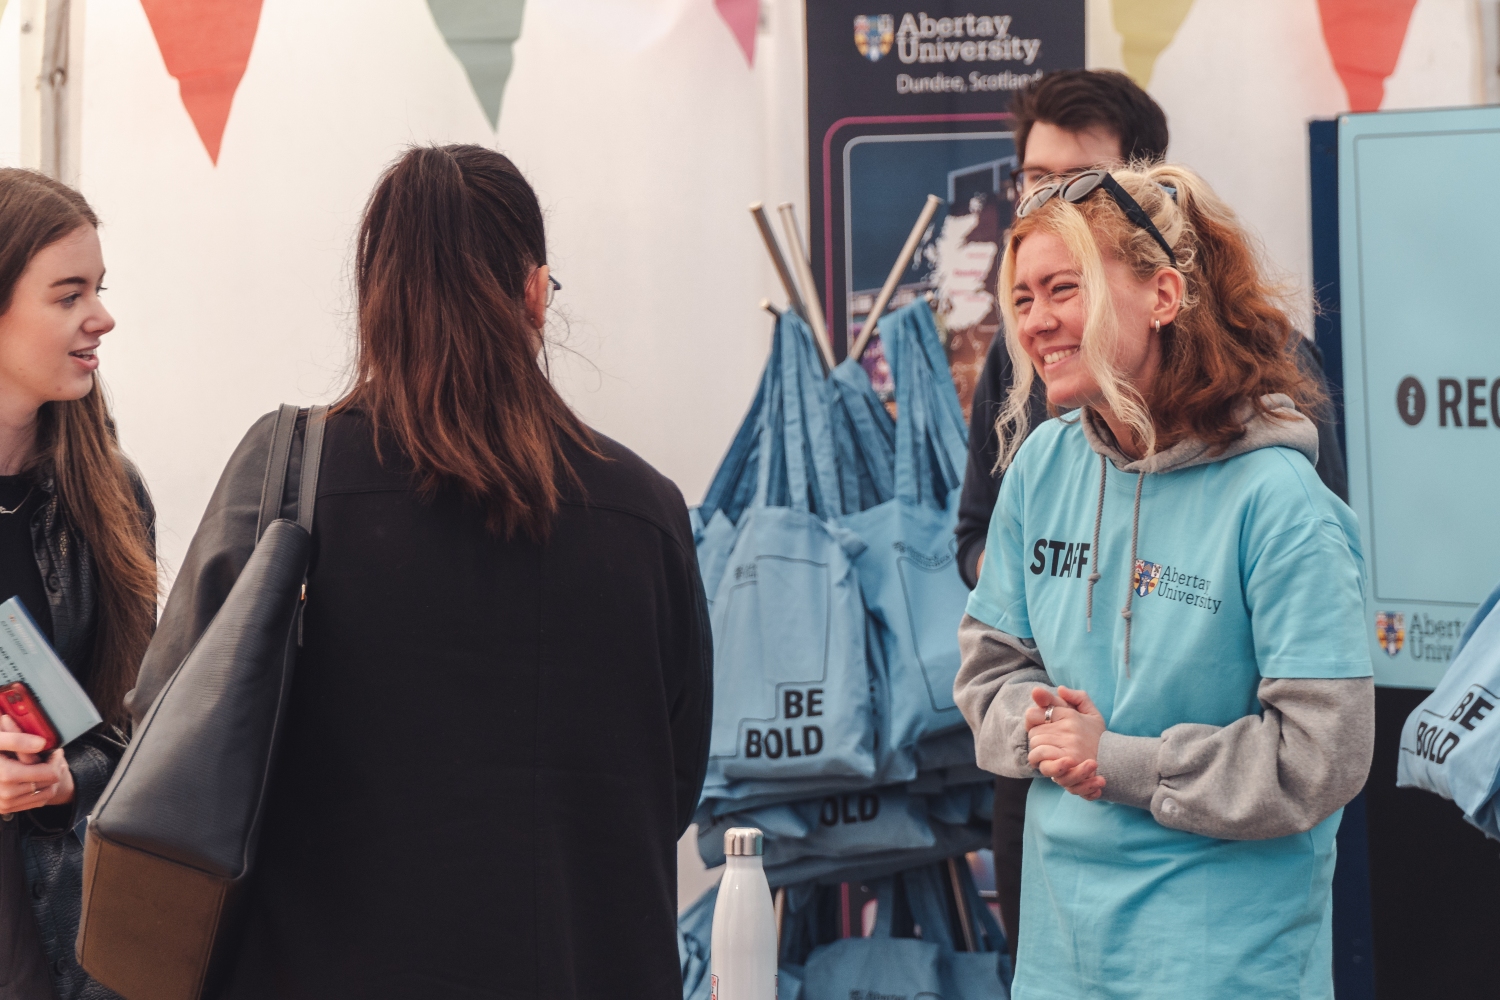 Abertay staff member greeting two guests at an Offer Holder Day